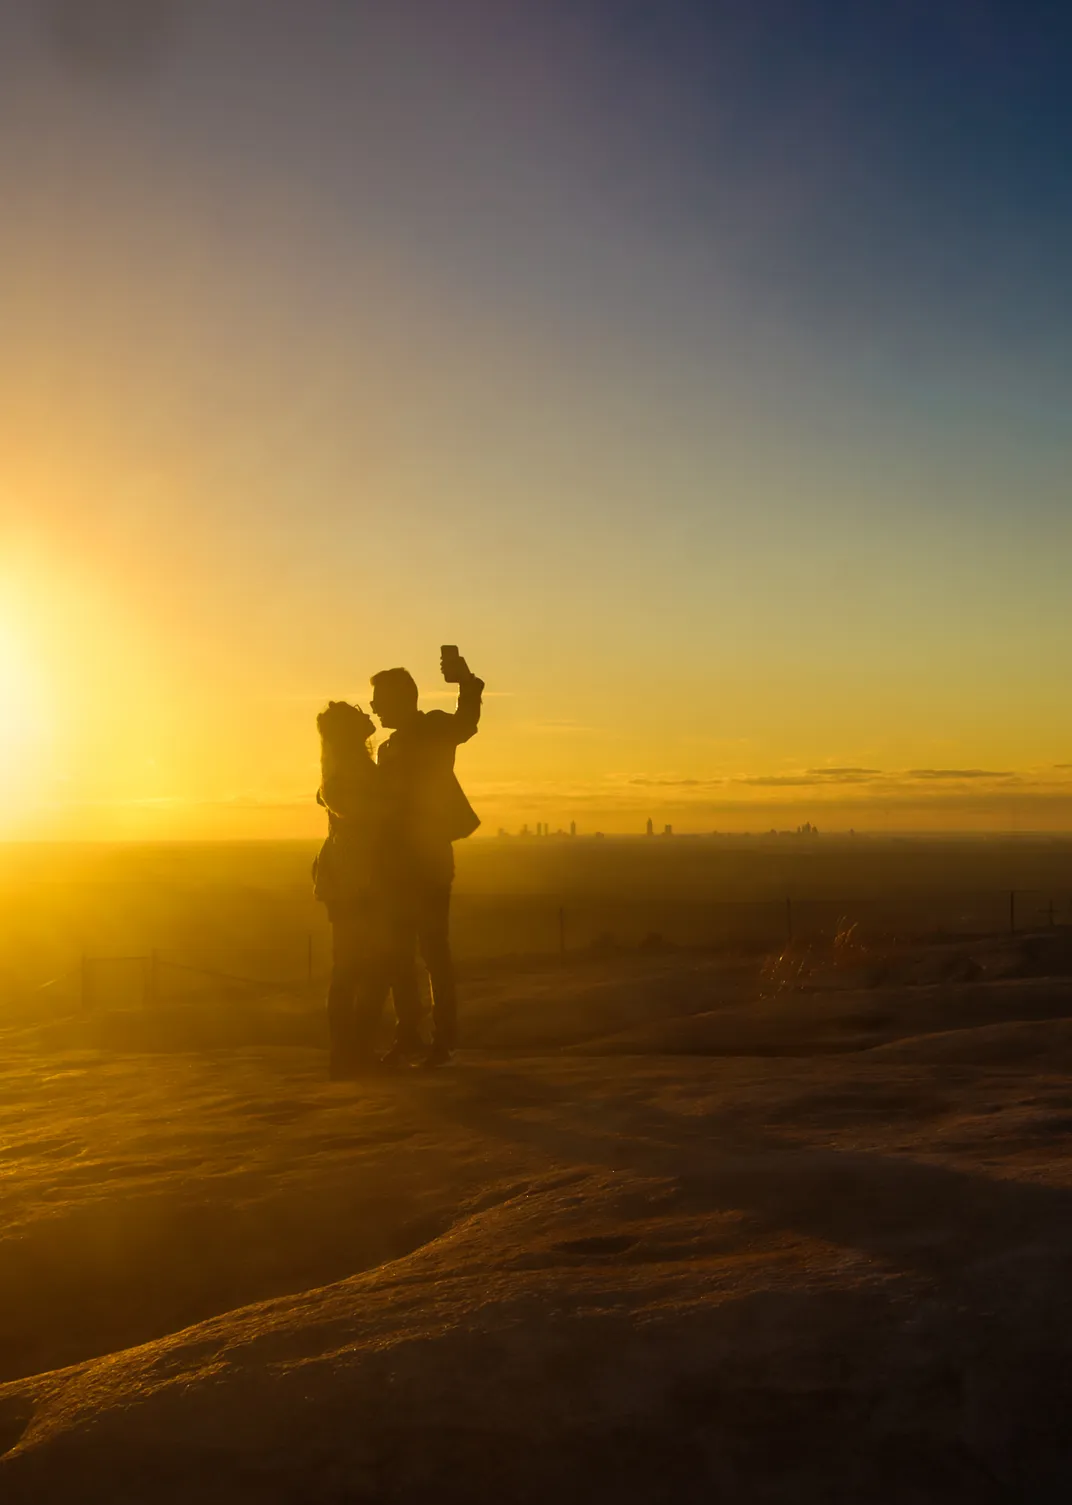 15 - A couple takes a selfie with the skyline of Atlanta barely visible in the background as the sun begins to set.